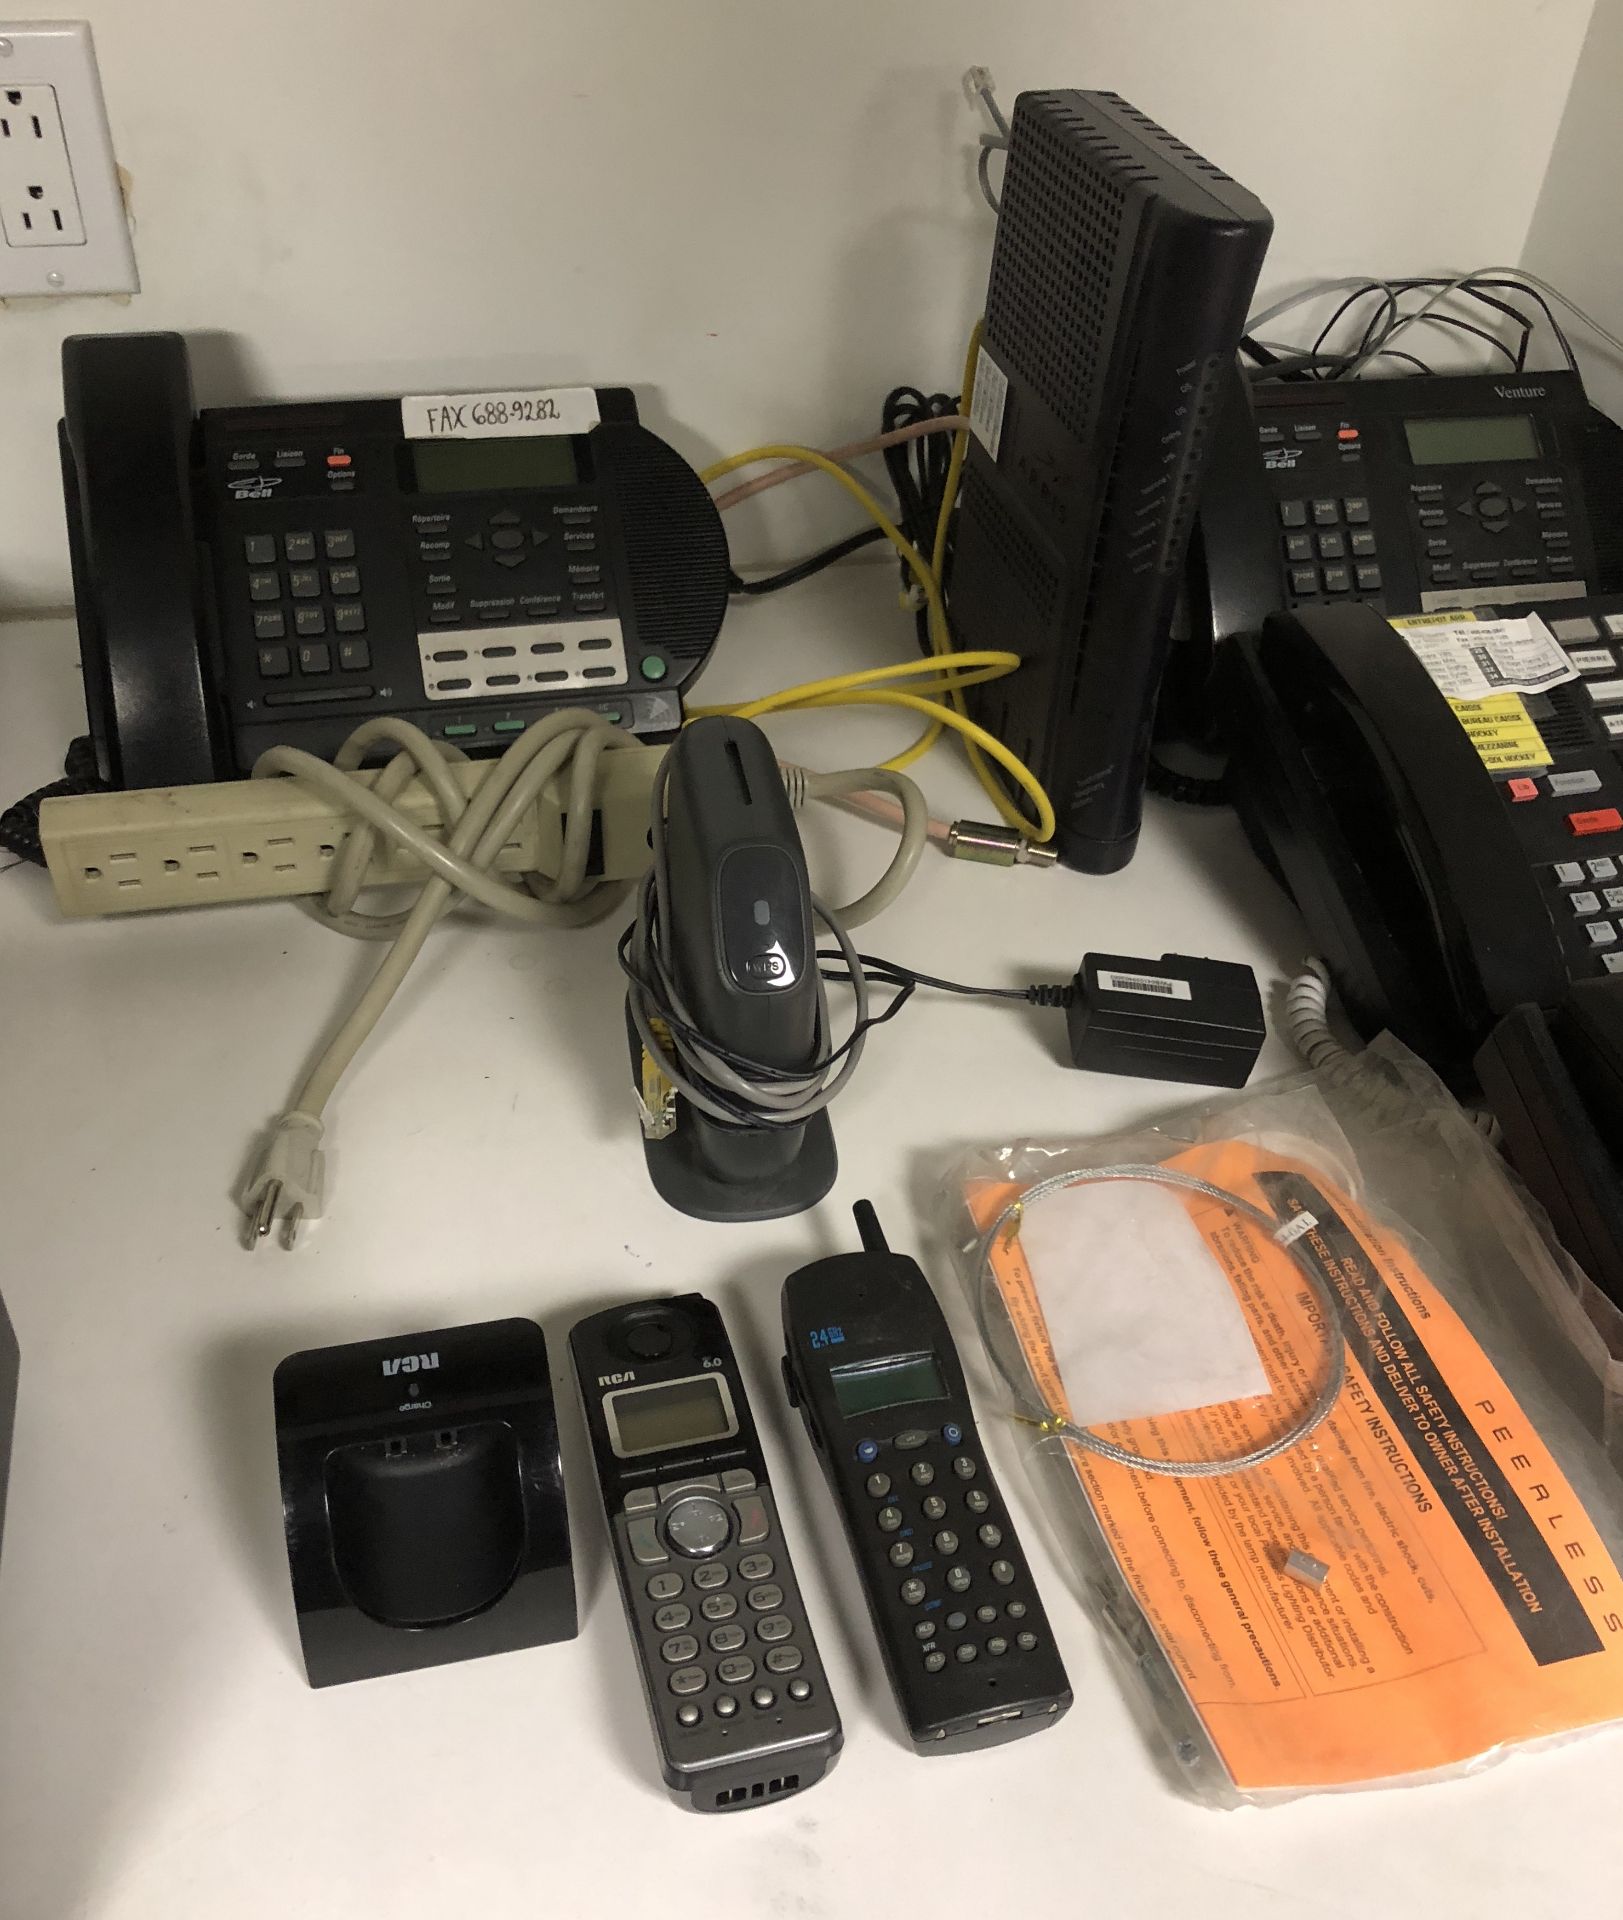 LOT OF OFFICE PHONES AND SMALL ROUTER, PLUS MISC ITEMS - Image 3 of 3